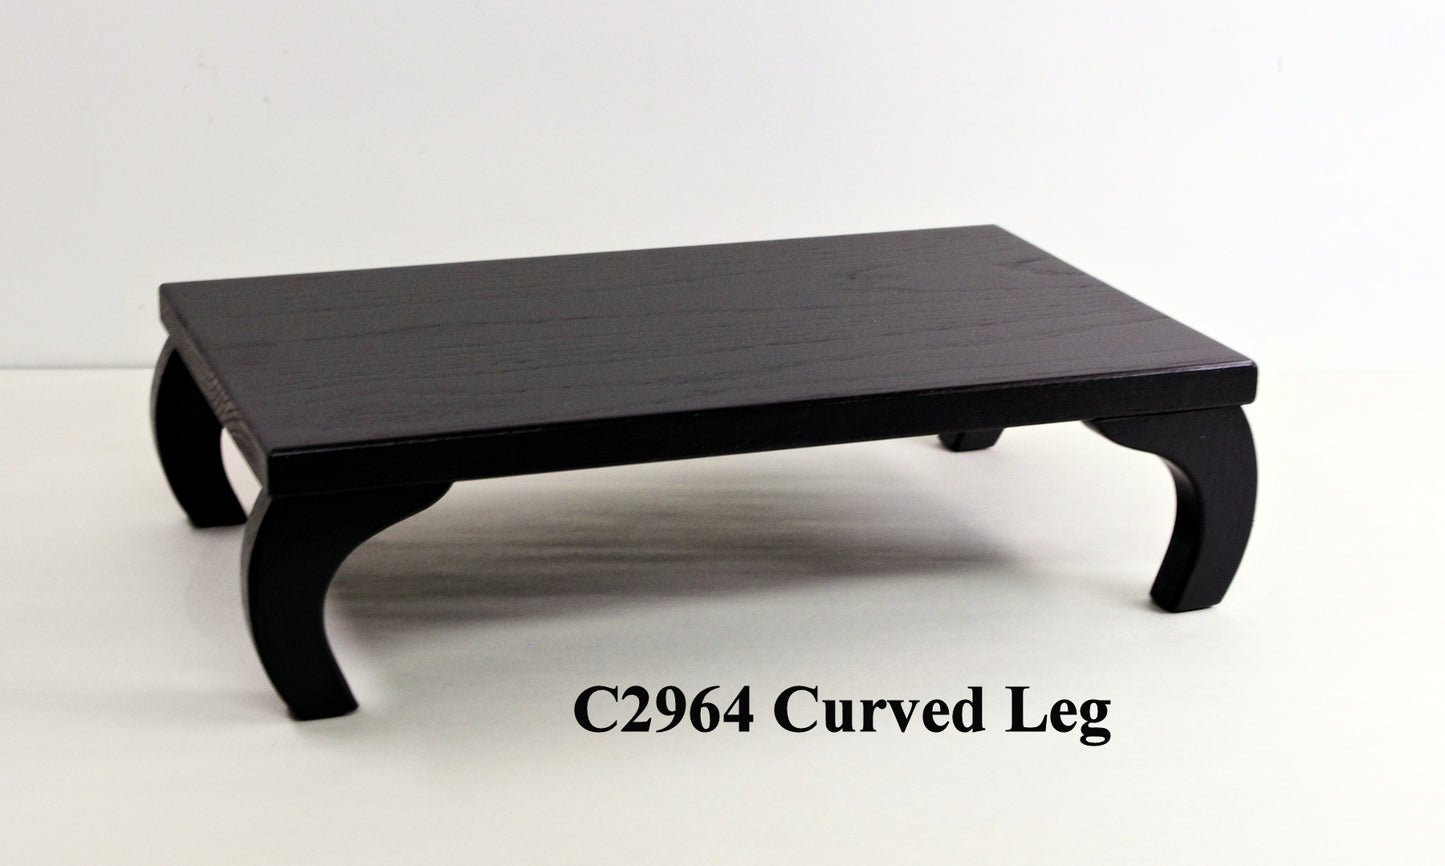 Bonsai Stand Curved Leg C2964 Made to Order 36" Length